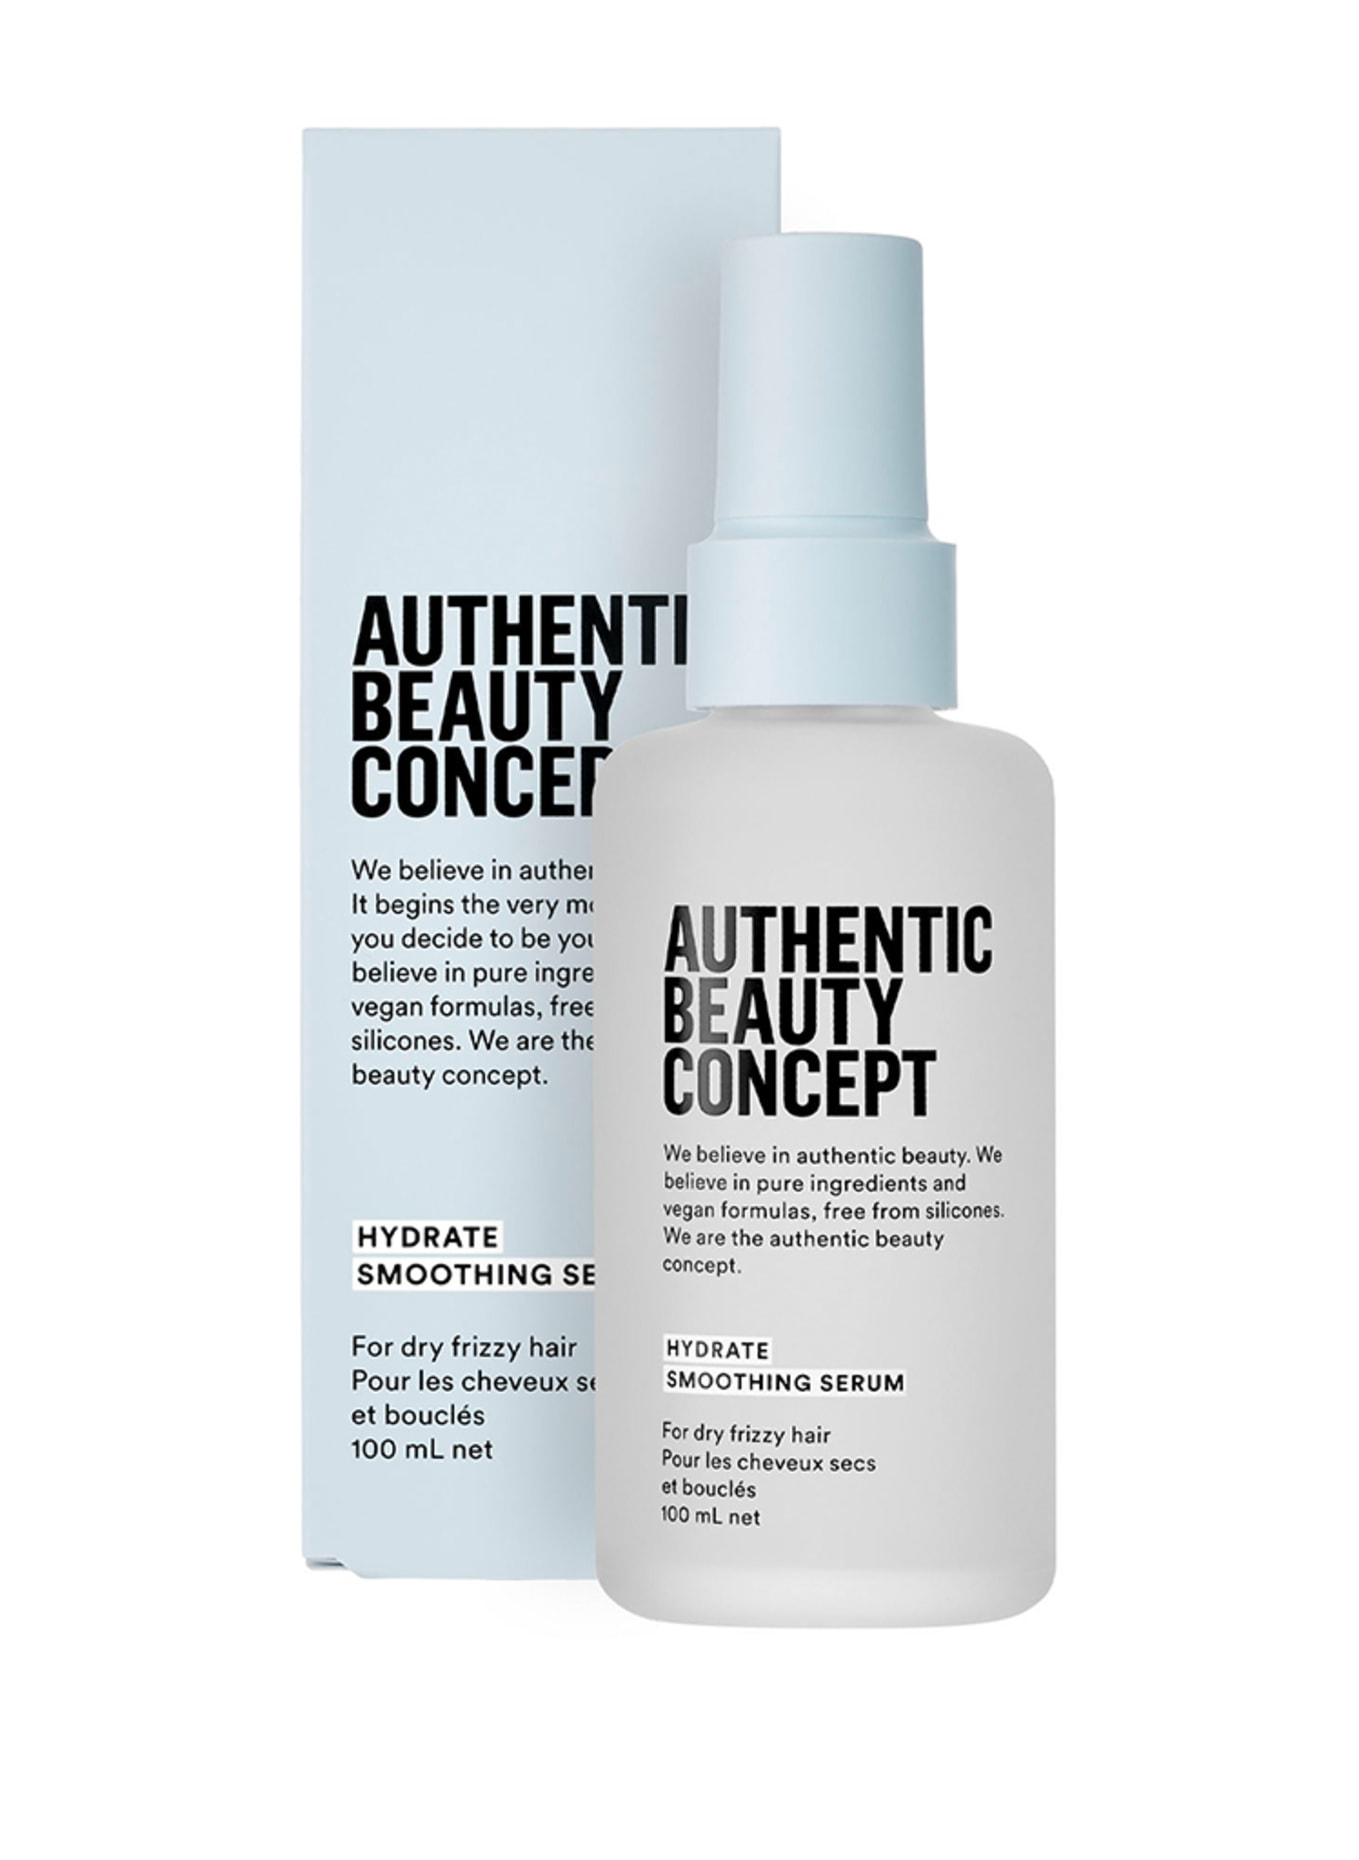 AUTHENTIC BEAUTY CONCEPT HYDRATE SMOOTHING SERUM (Obrázek 2)